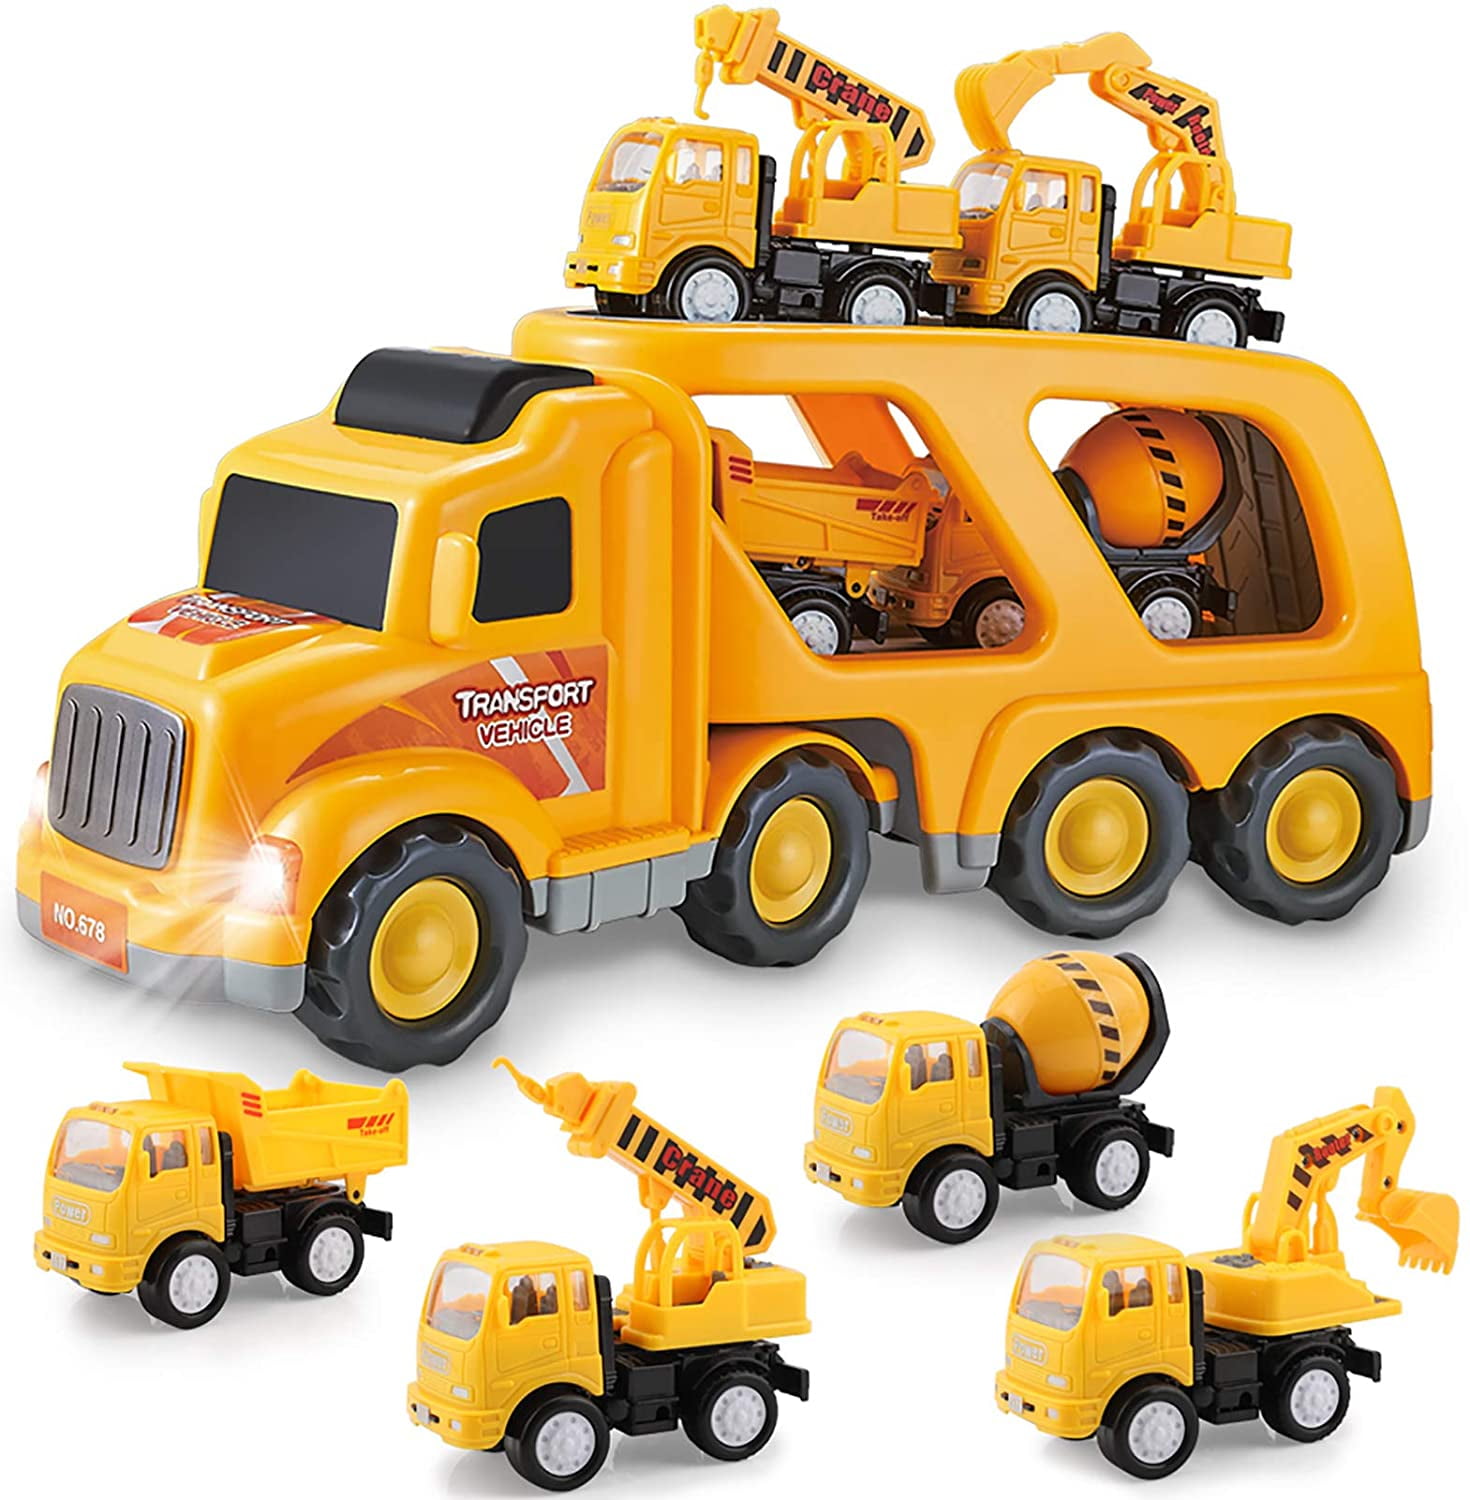 Kids Boys Large Engineering Car Toy Vehicle Dump Truck Tractor Model Toy LB 